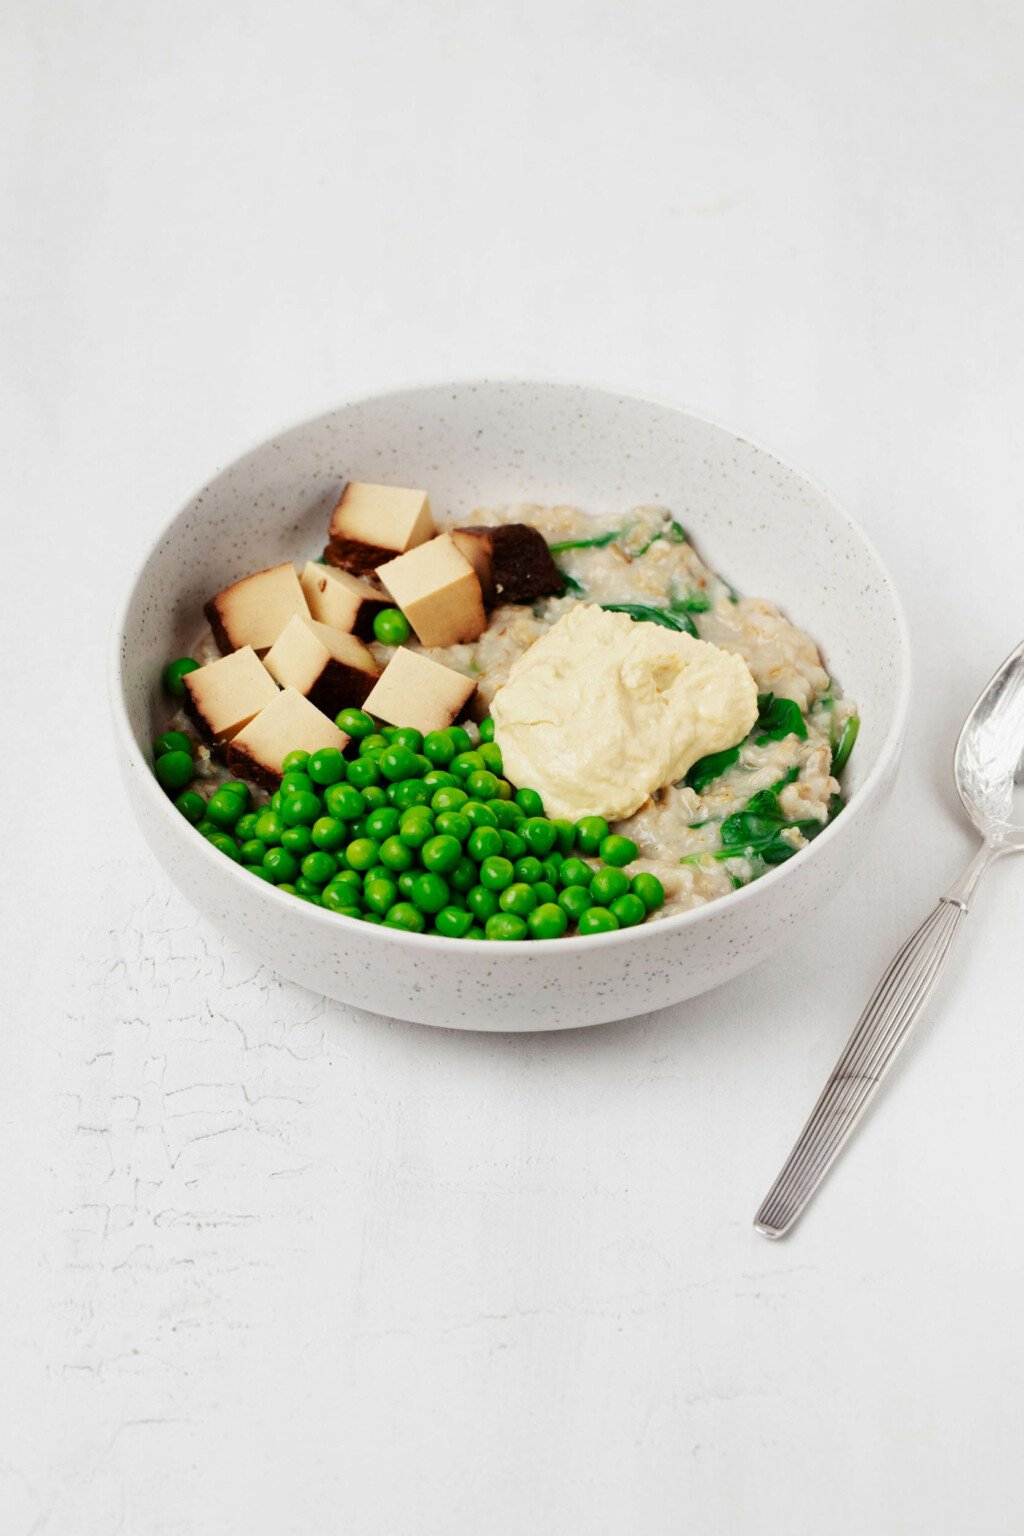 A round white bowl, containing savory oatmeal and green vegetables, is resting on a white surface. A metal spoon is perched nearby.